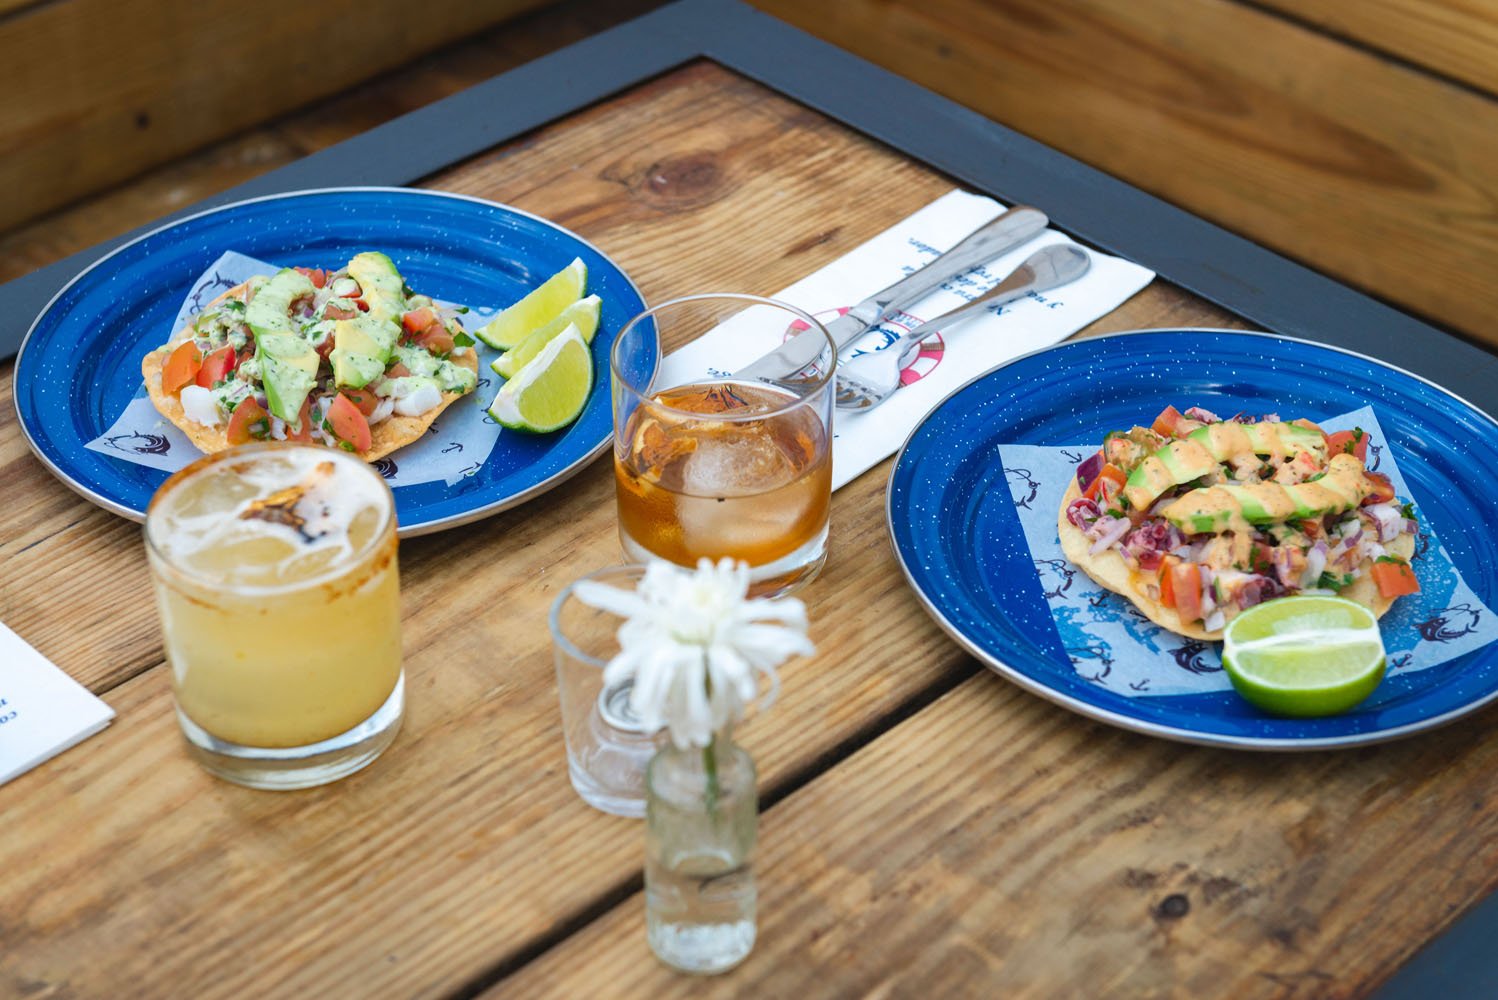 Two blue plates each containing colorful fish tacos, paired with glasses of iced tea, on a wooden table with cutlery and a small white flower vase.